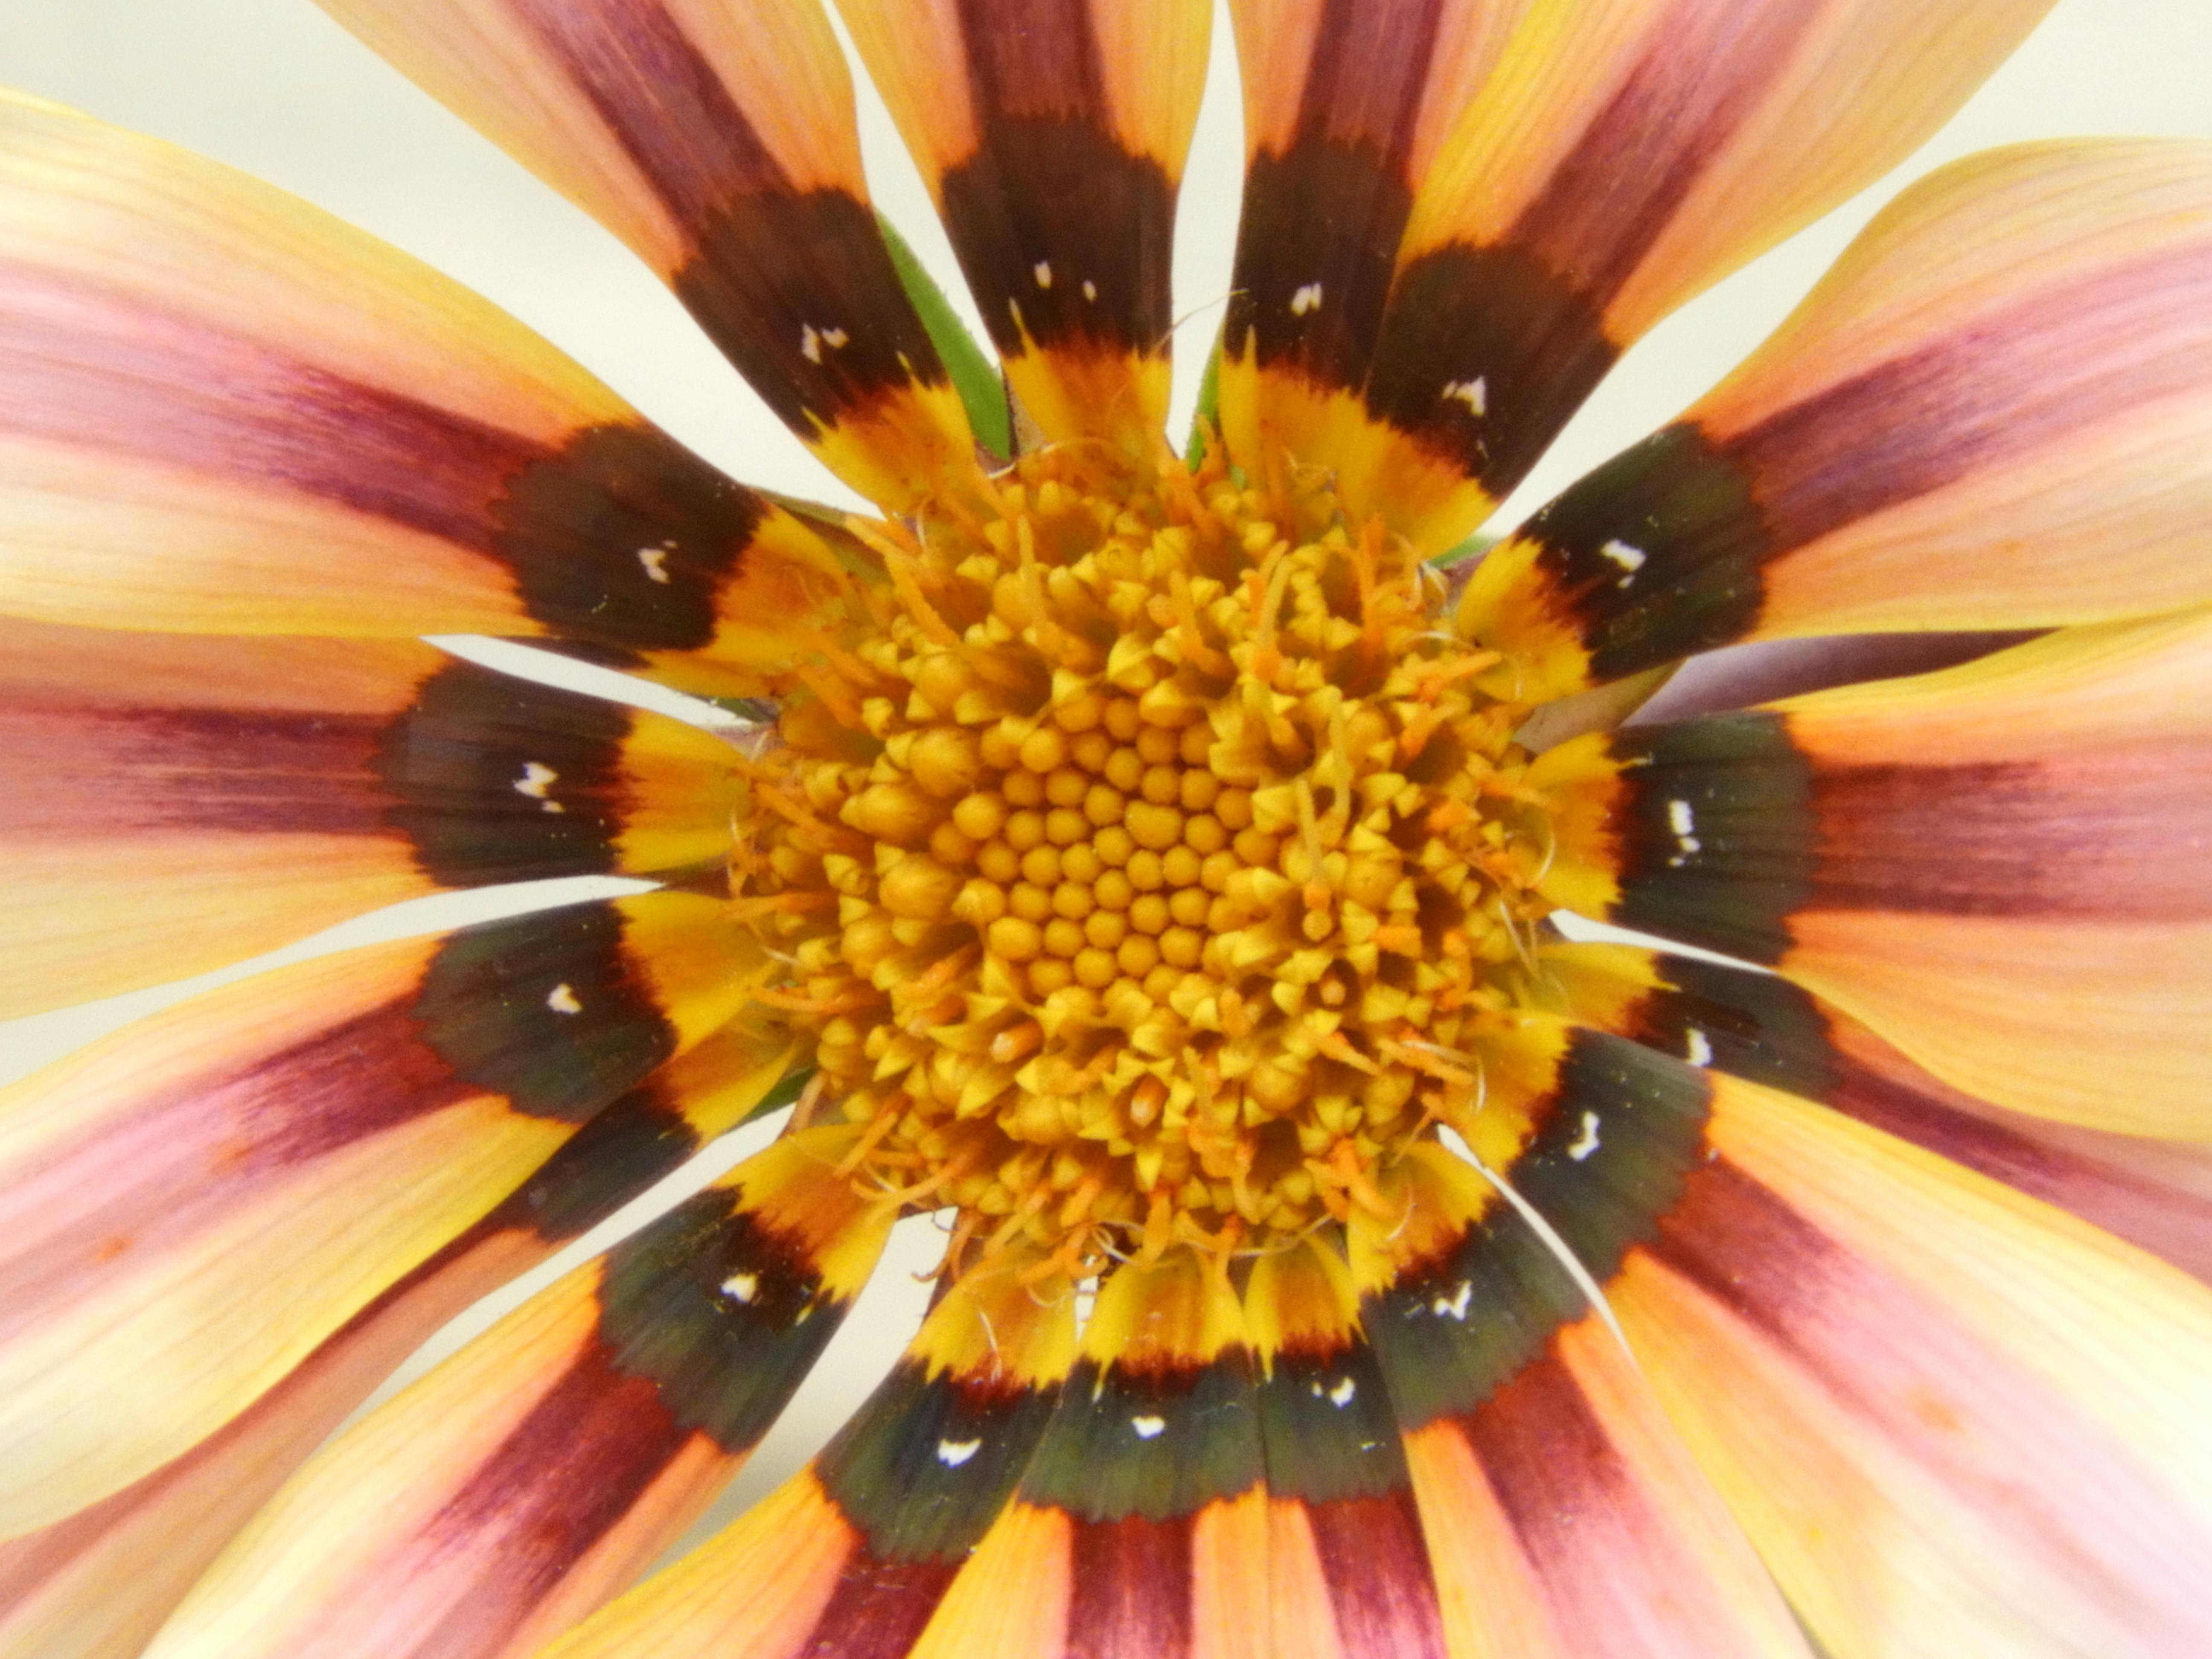 Free stock photo of One more vision of sunflower....